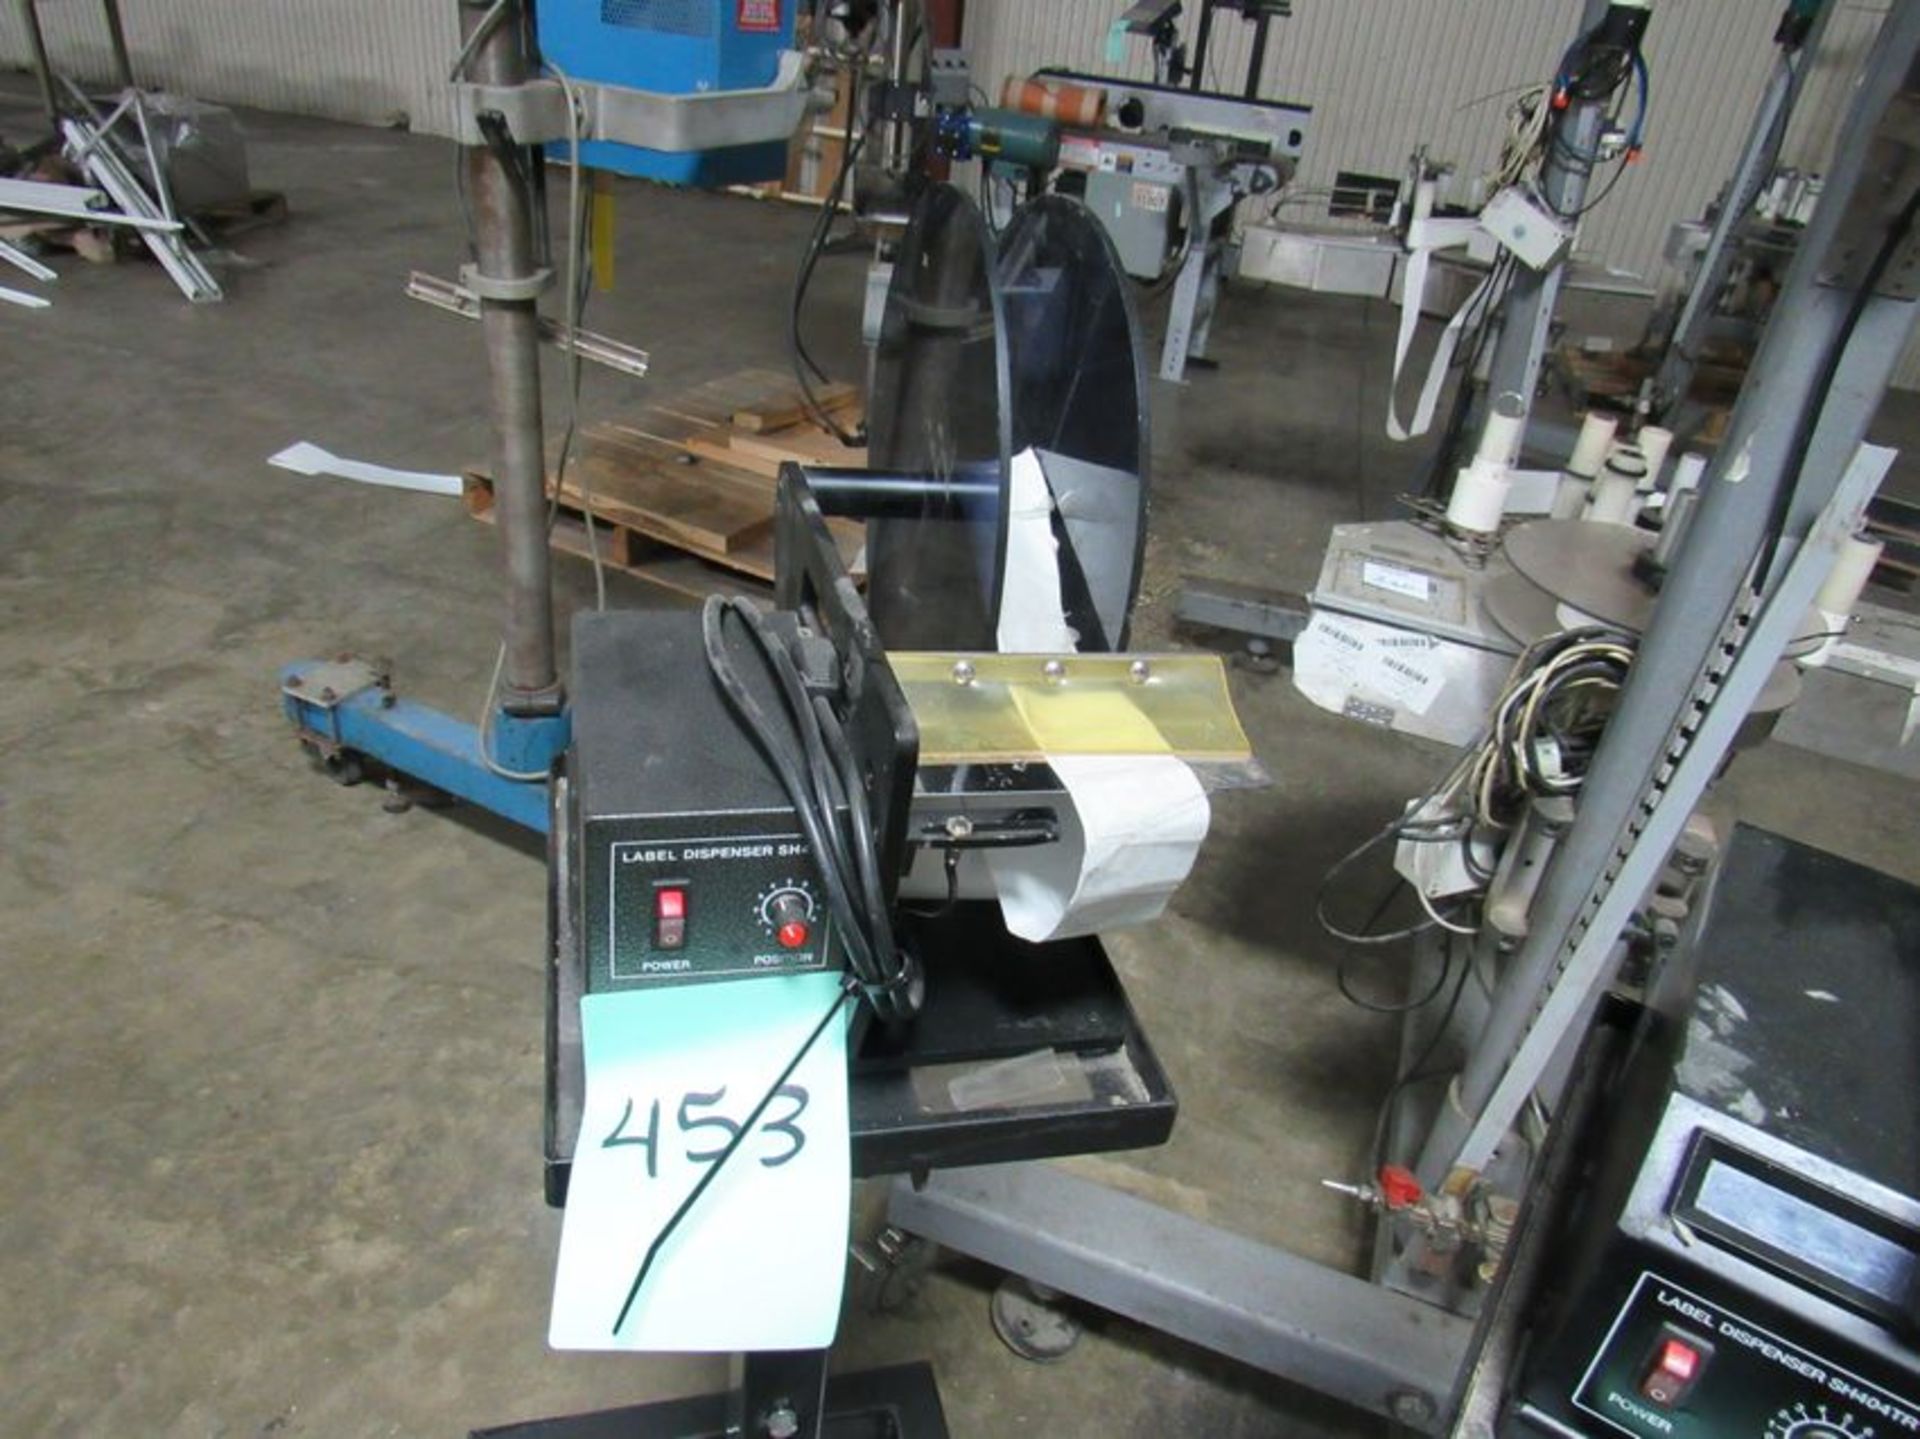 Label Dispenser comes with manual and on stand with casters (Rigging and loading fees included in